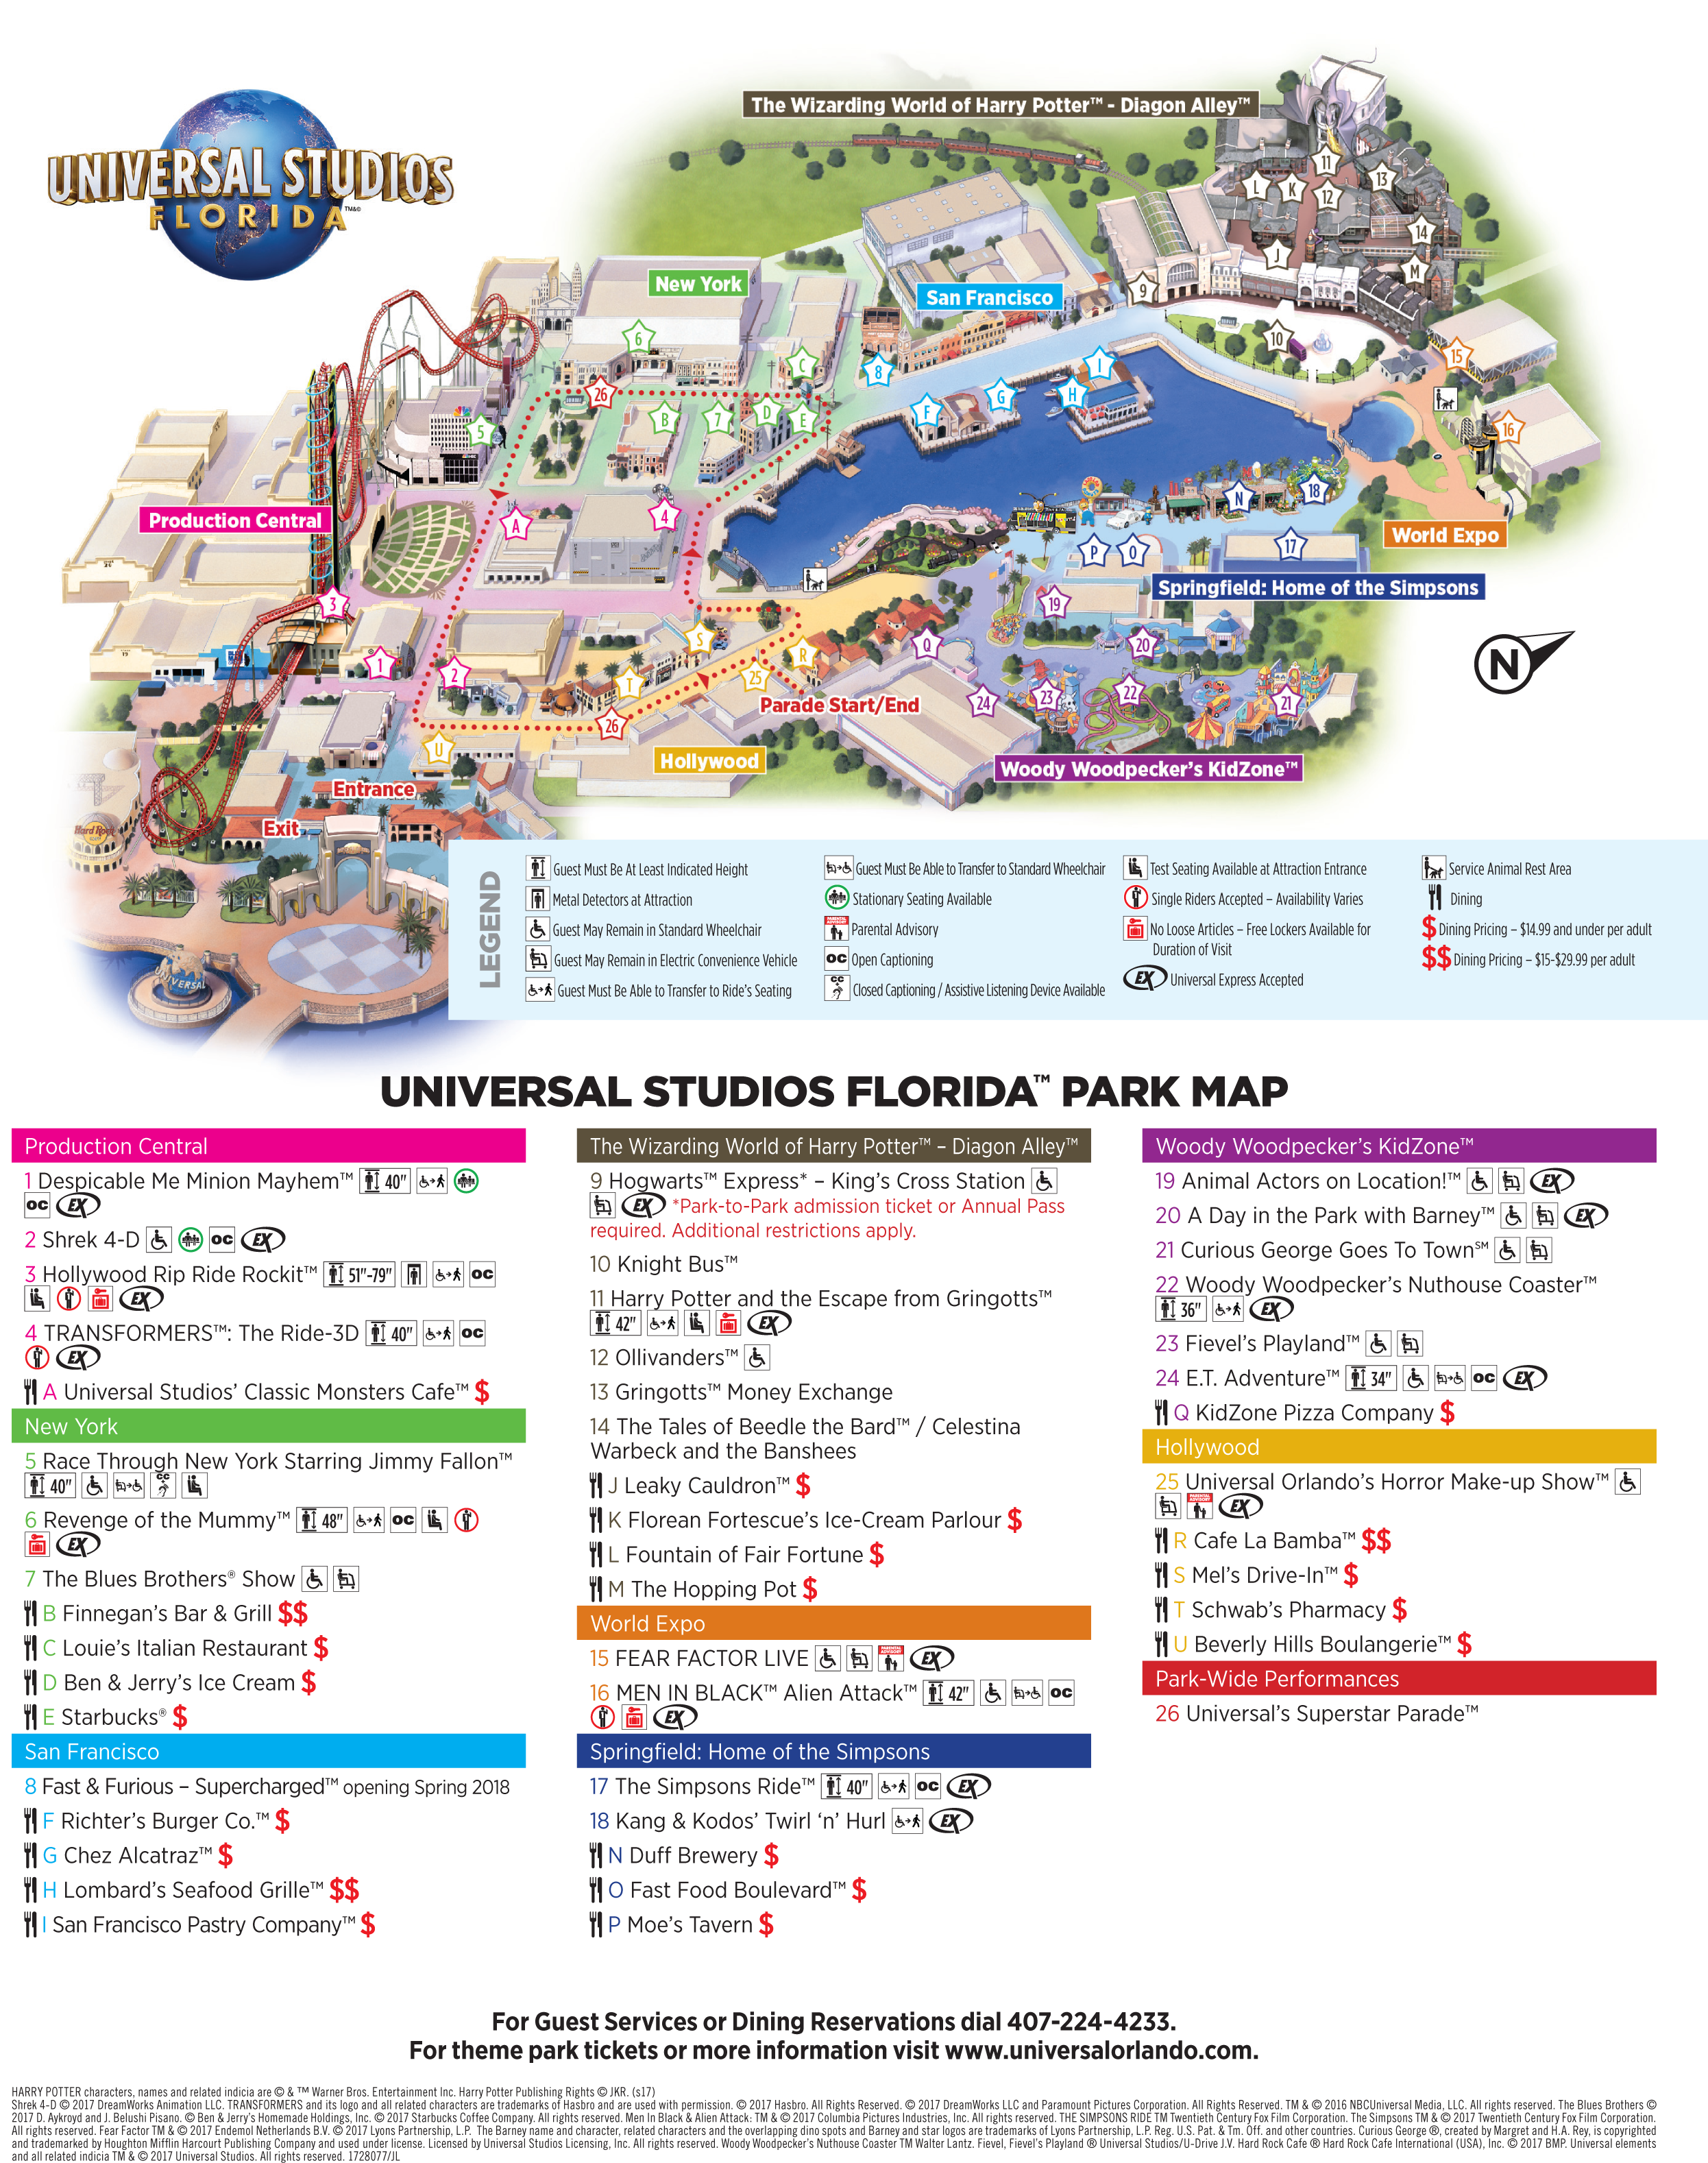 A Map Of A Theme Park